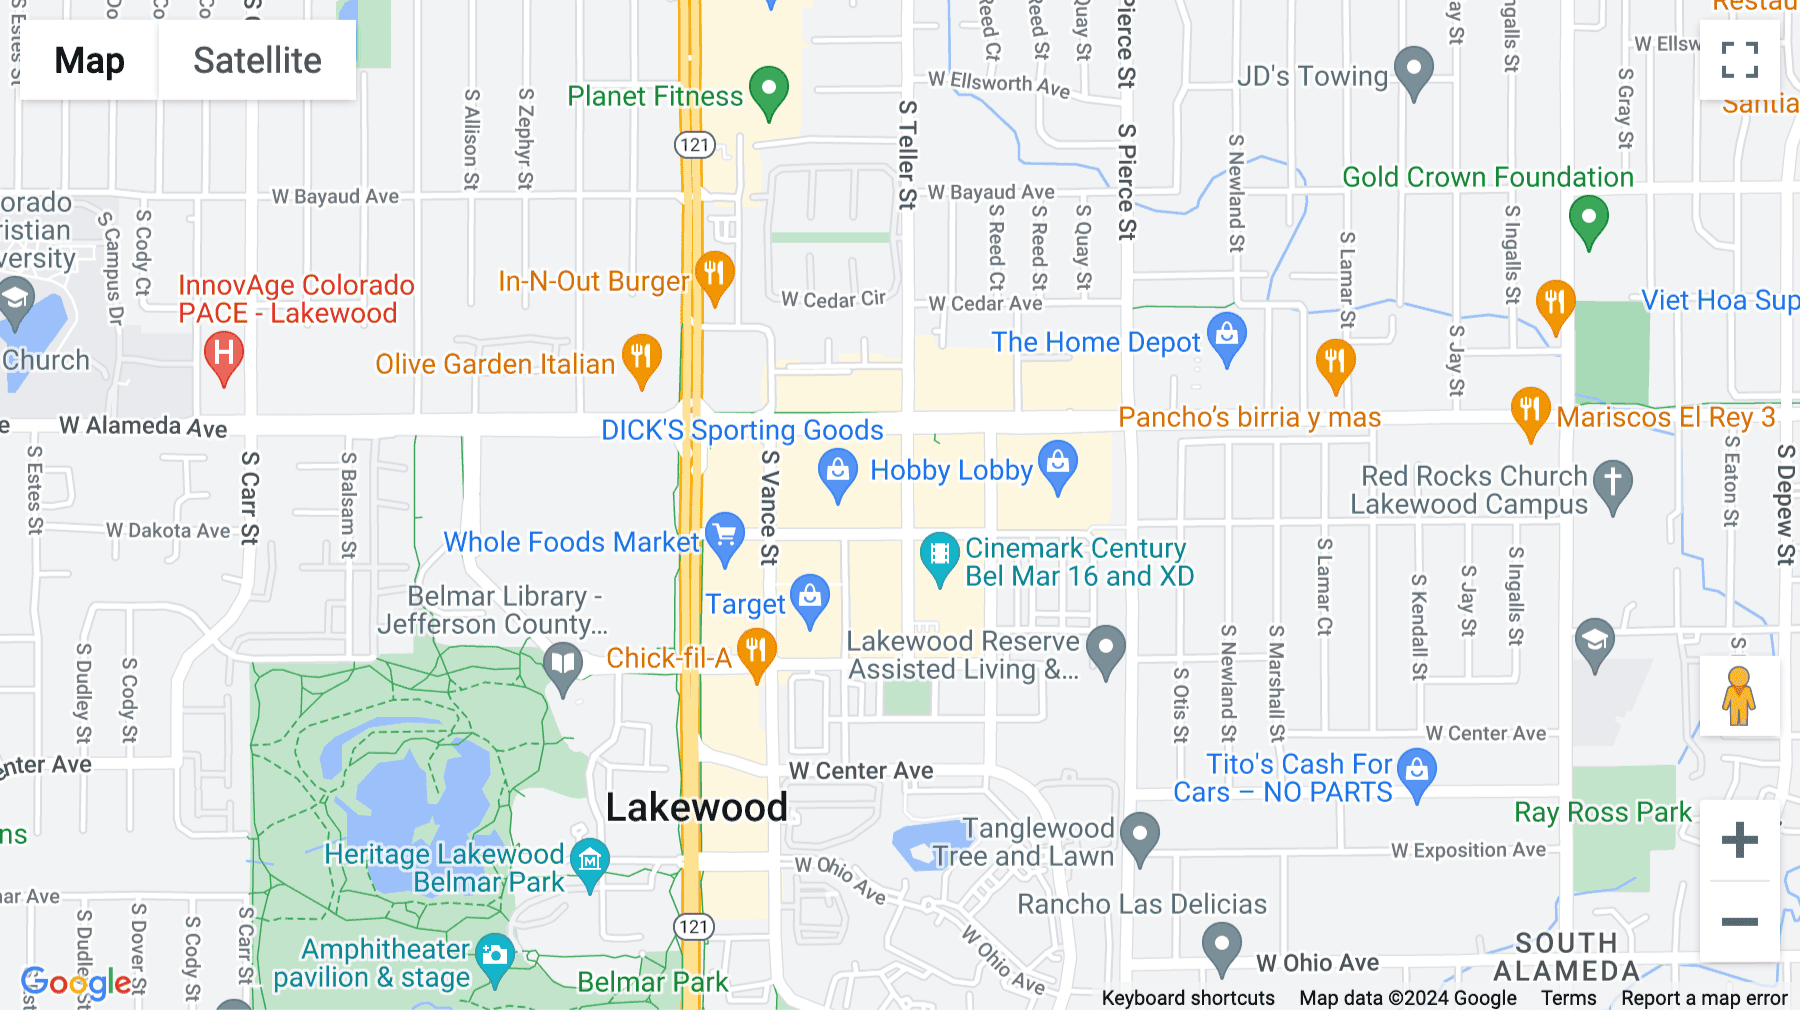 Click for interative map of 355 S Teller St, Suite 200, Lakewood (Colorado)